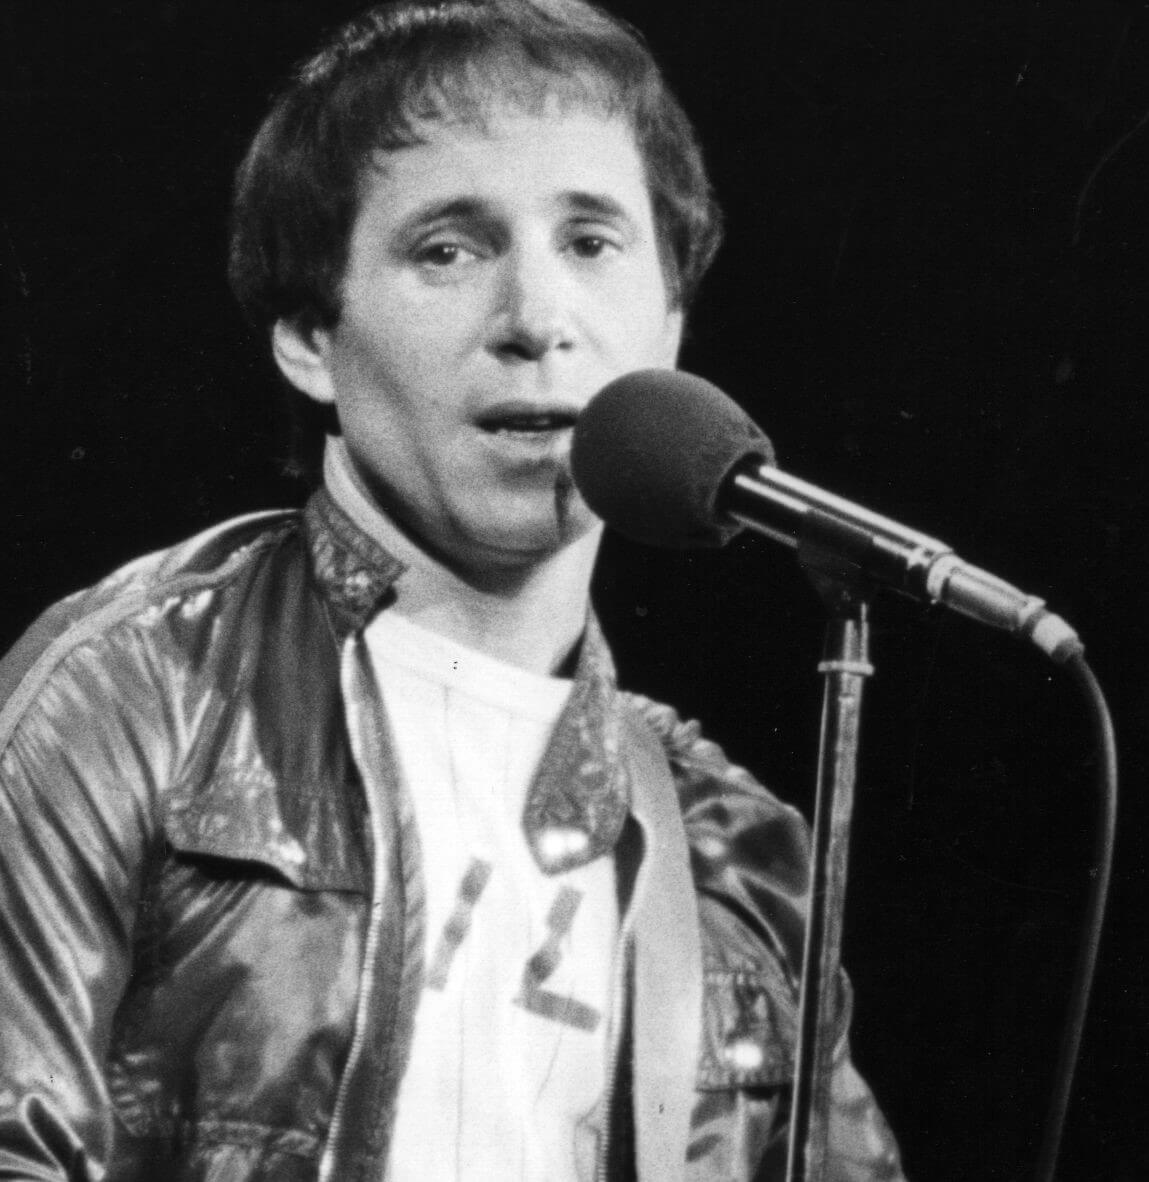 "Bridge Over Troubled Water" star Paul Simon with a microphone